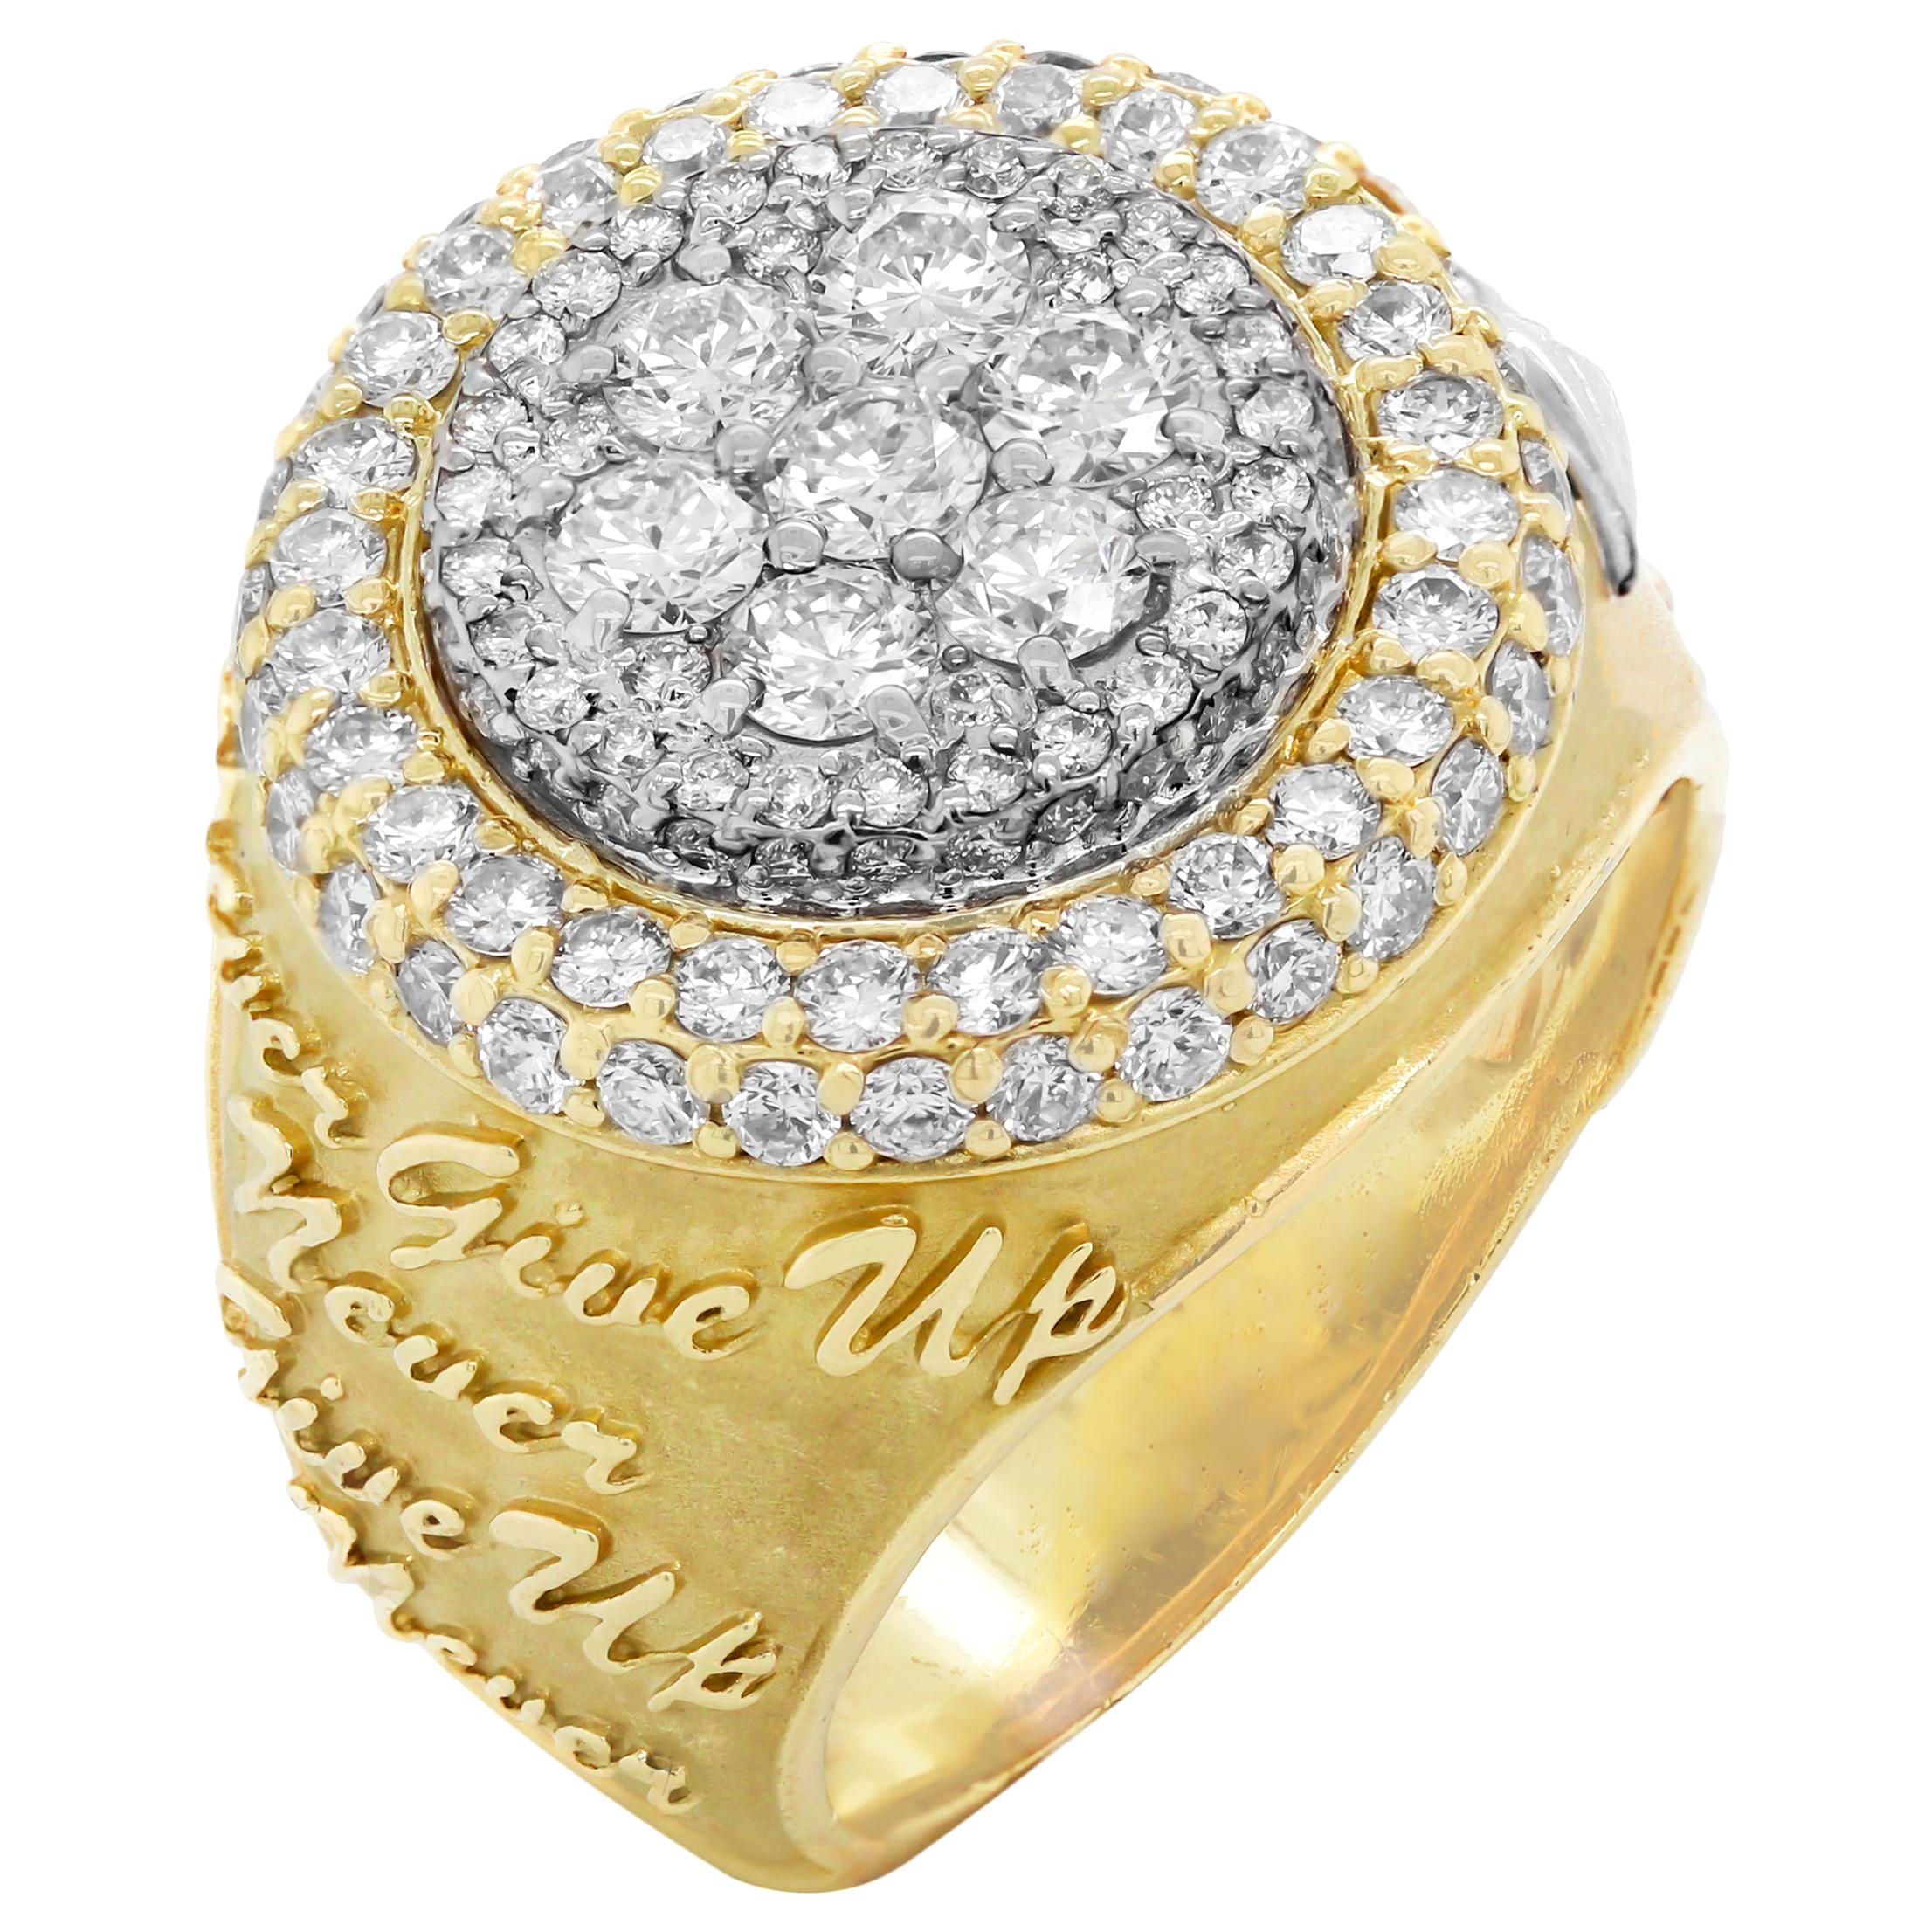 Stambolian Yellow Gold and Diamond Men's Ring Never Give Up